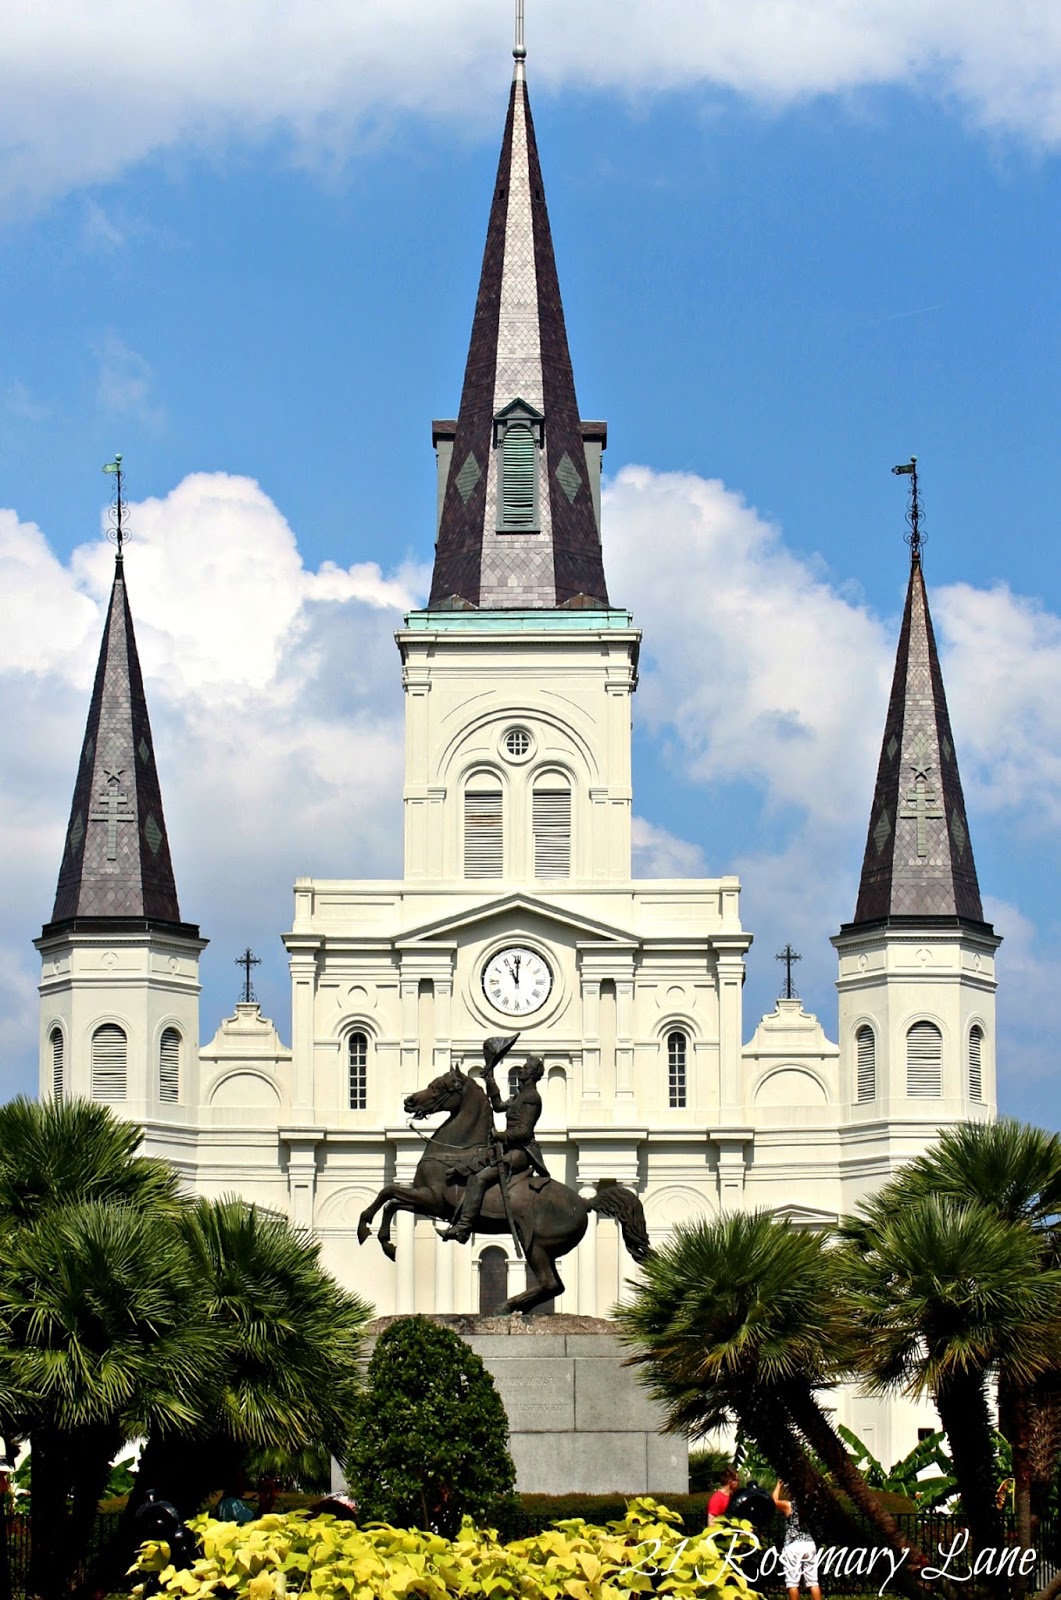 21 Rosemary Lane: The Cathedral Basilica of St Louis King of France, New Orleans